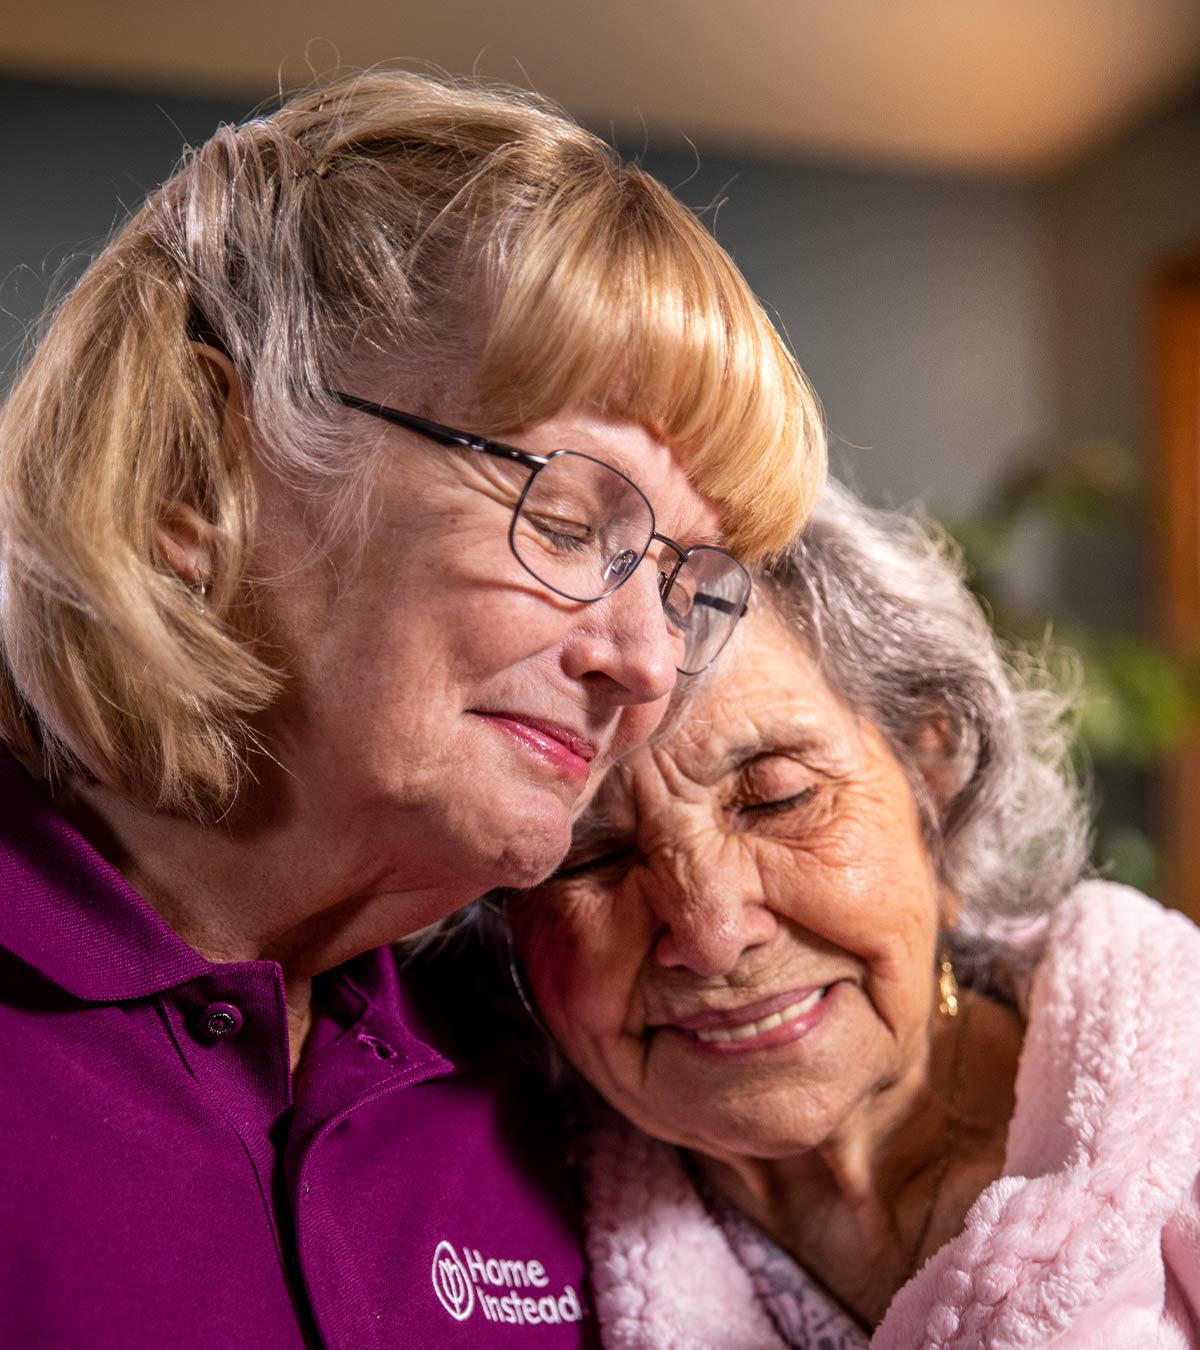 CAREGiver providing in-home senior care services. Home Instead of Fairlawn, OH provides Elder Care to aging adults. 